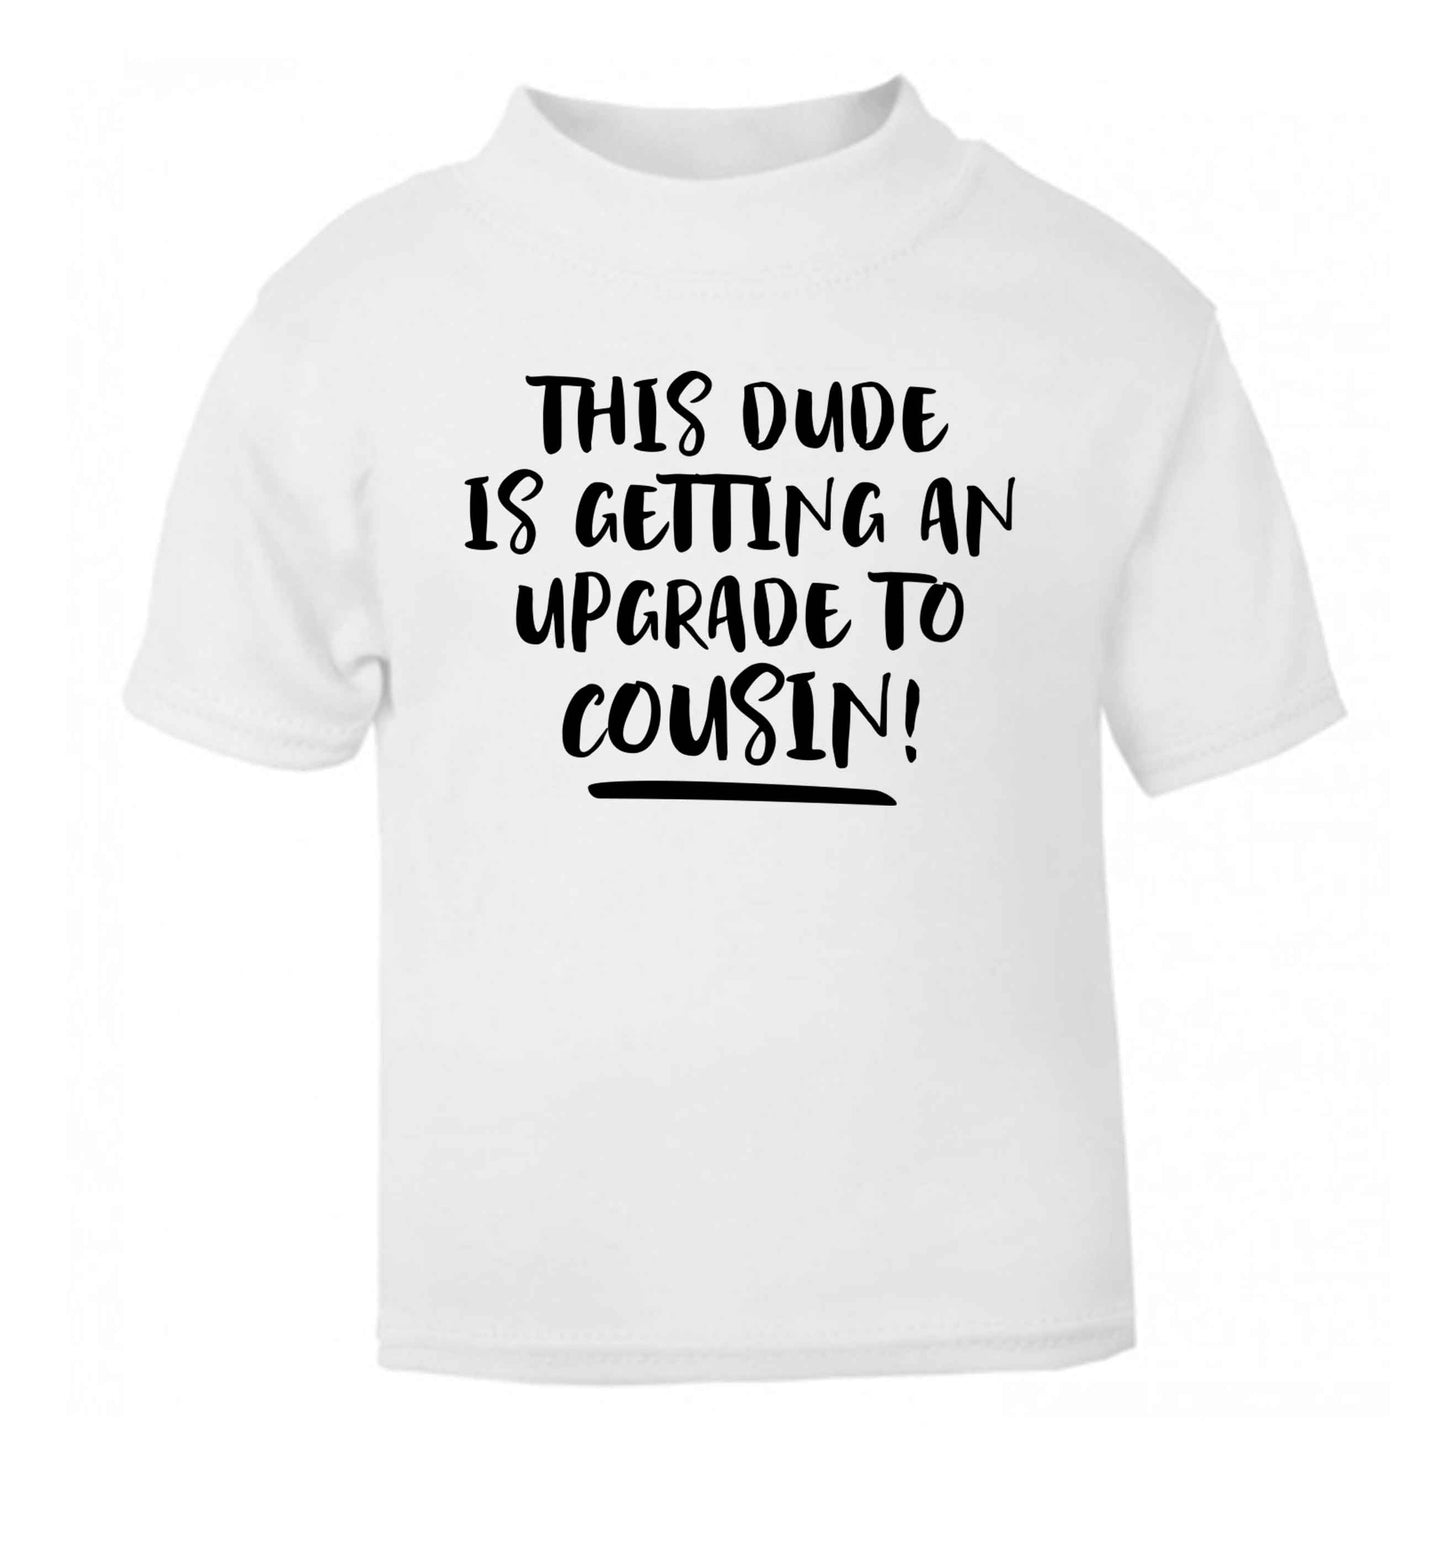 This dude is getting an upgrade to cousin! white Baby Toddler Tshirt 2 Years